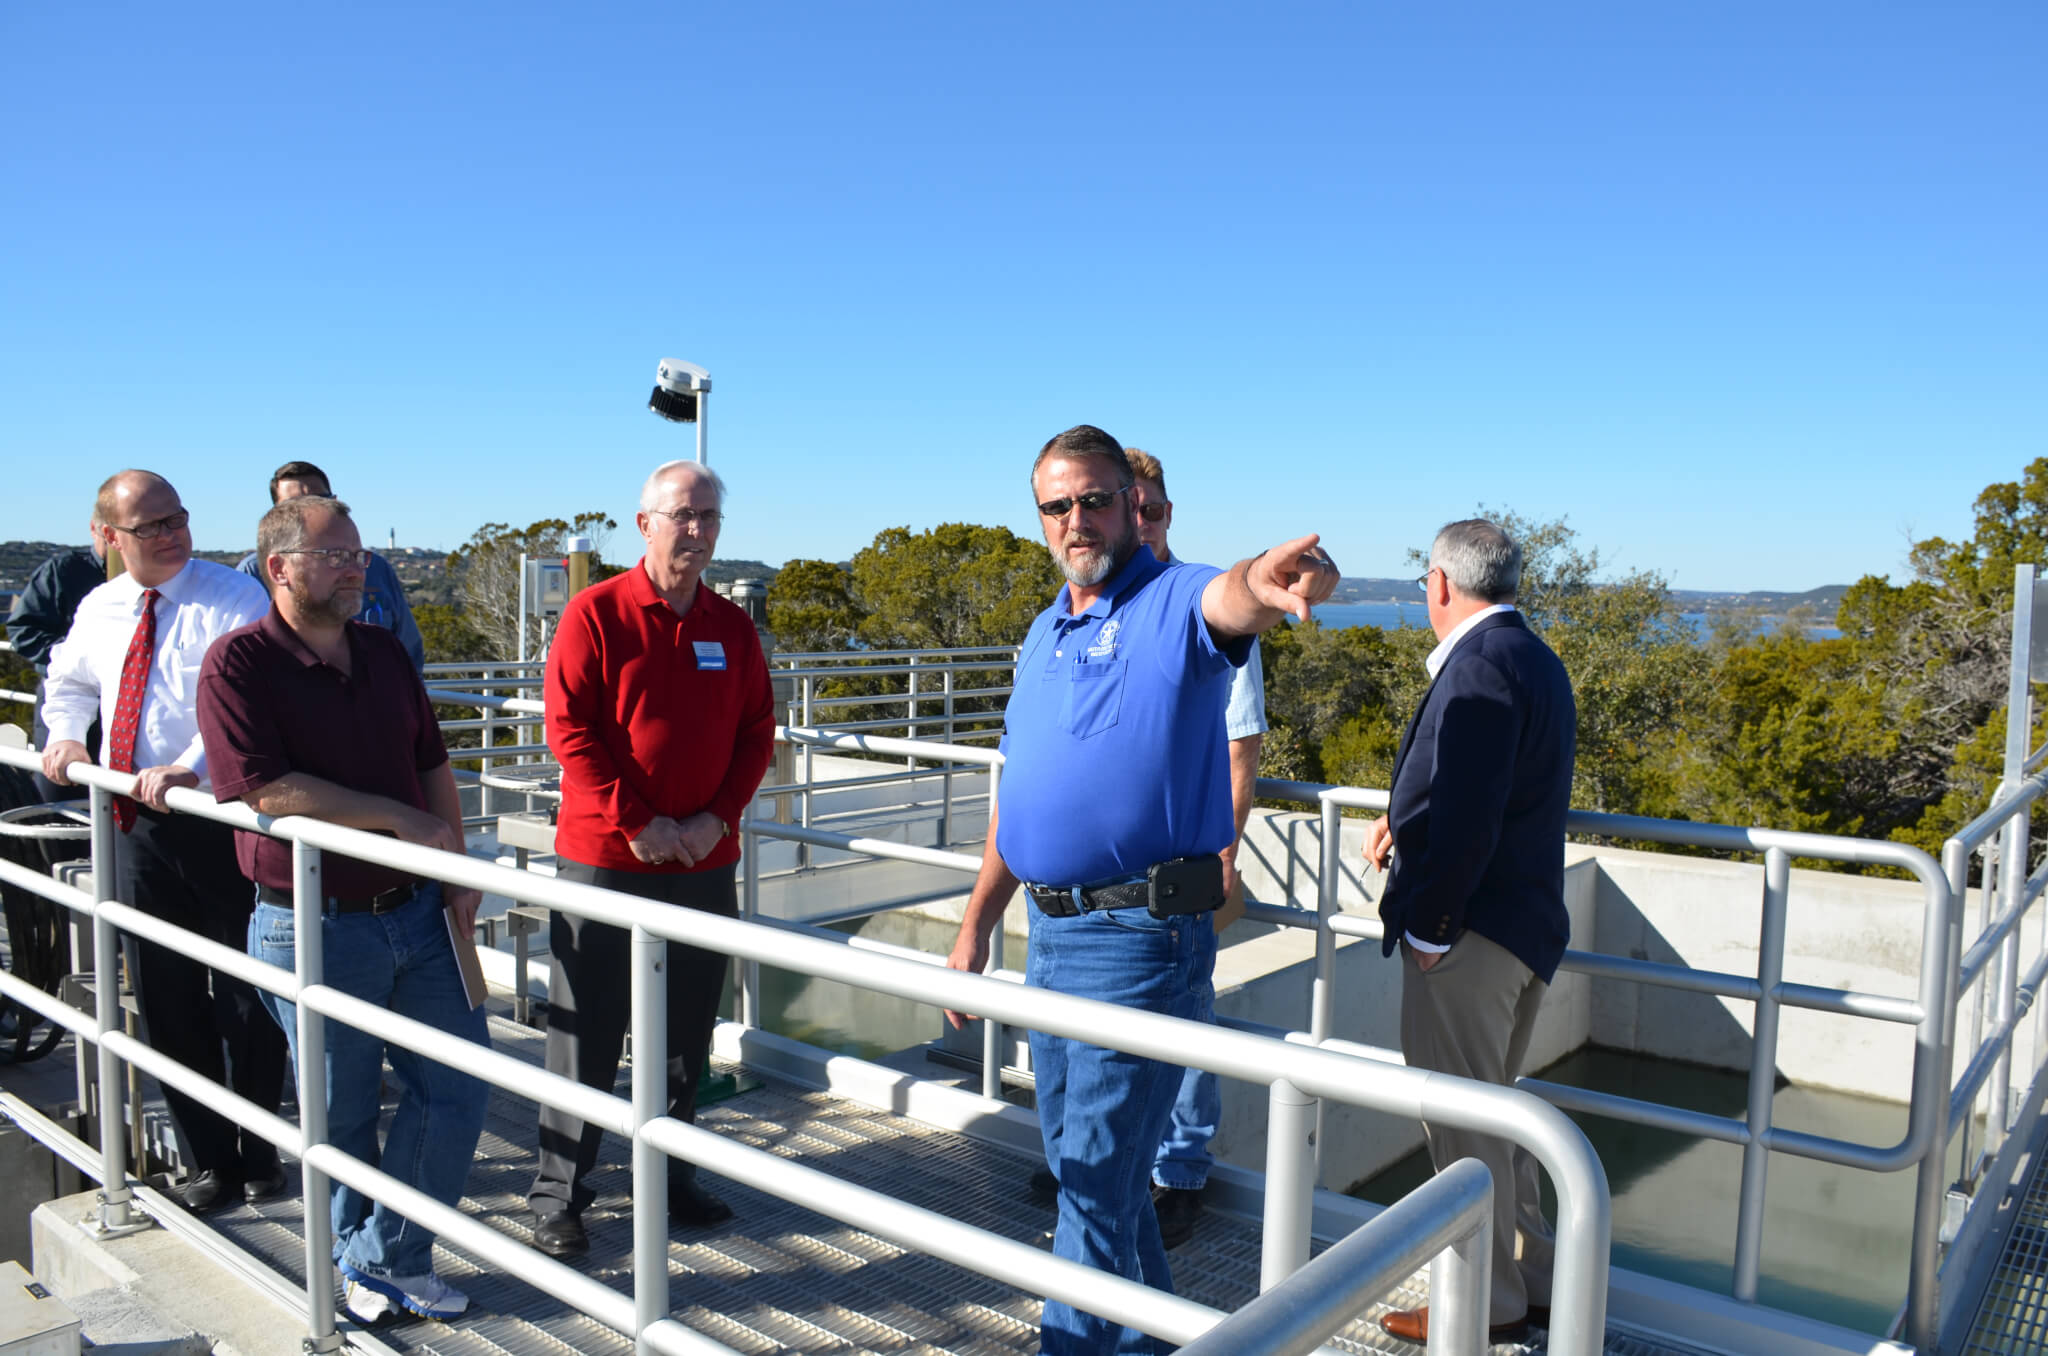 Tours were given at the new Mansfield Water Treatment Plant on Jan. 28 with views of Lake Travis, Mansfield Dam, Steiner Ranch and more. Water is taken from Lake Travis and treated at the plant and shared with WCID 17 customers, including Steiner Ranch. WCID serves approximately 37,500 people. Photo by Lynette Haaland